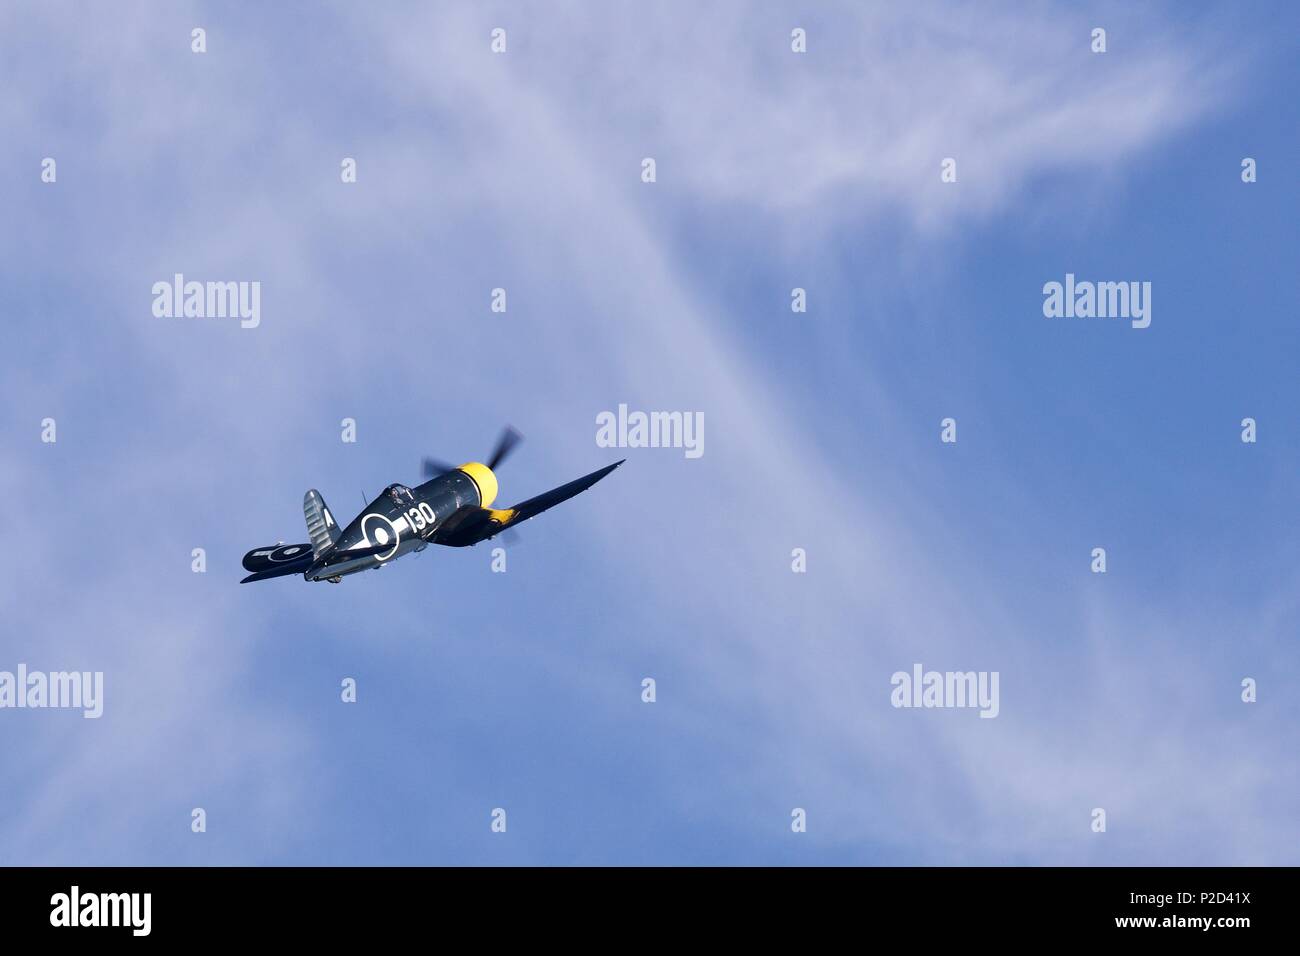 Goodyear FG-1D Corsair from The Fighter Collection flying at Shuttleworth Fly Navy airshow on 3rd June 2018 Stock Photo